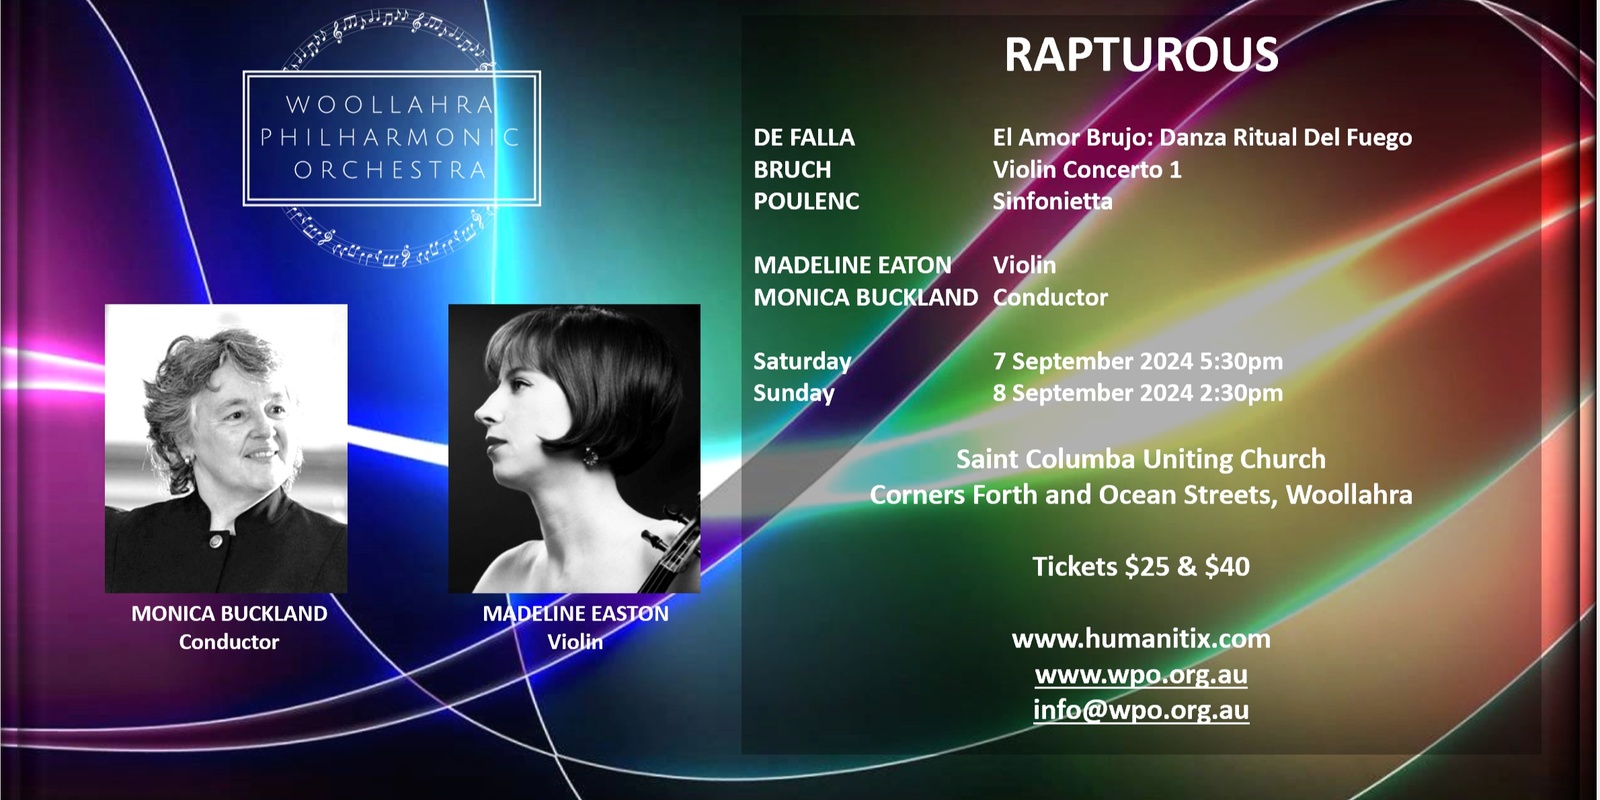 Banner image for Rapturous - Woollahra Philharmonic Orchestra